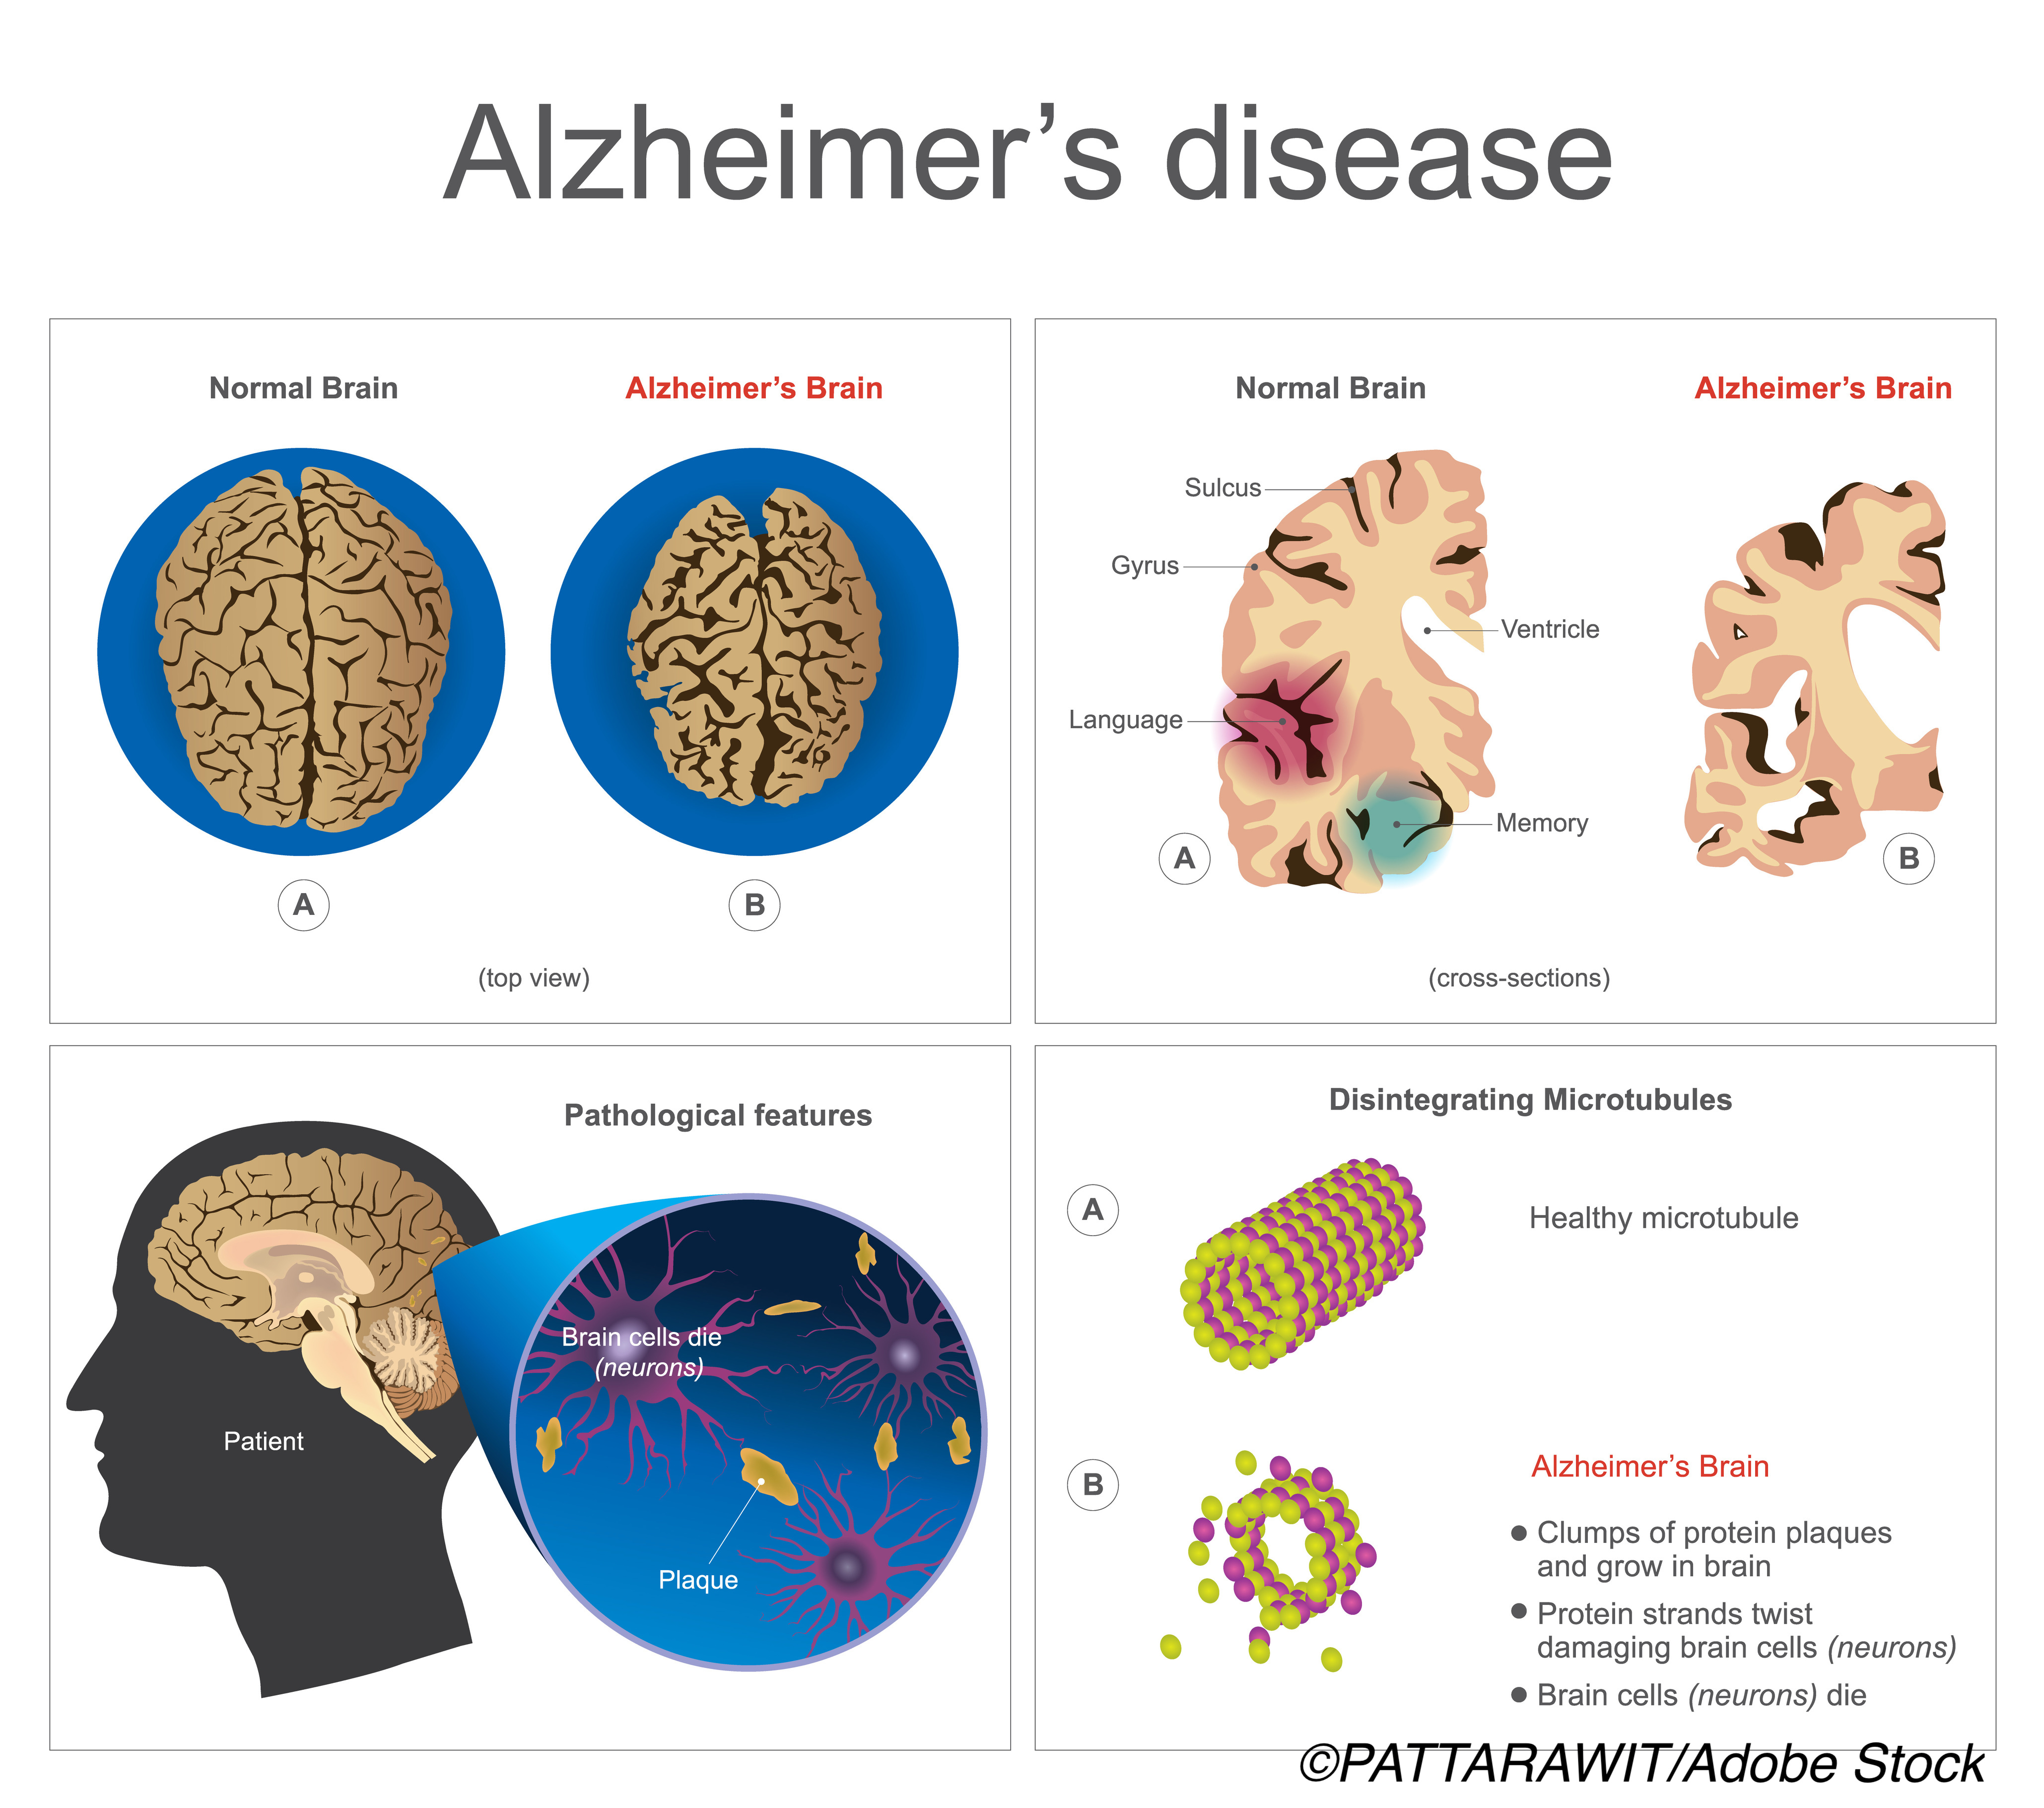 Biomarker Definition of Alzheimer’s Not Ready for Everyday Use